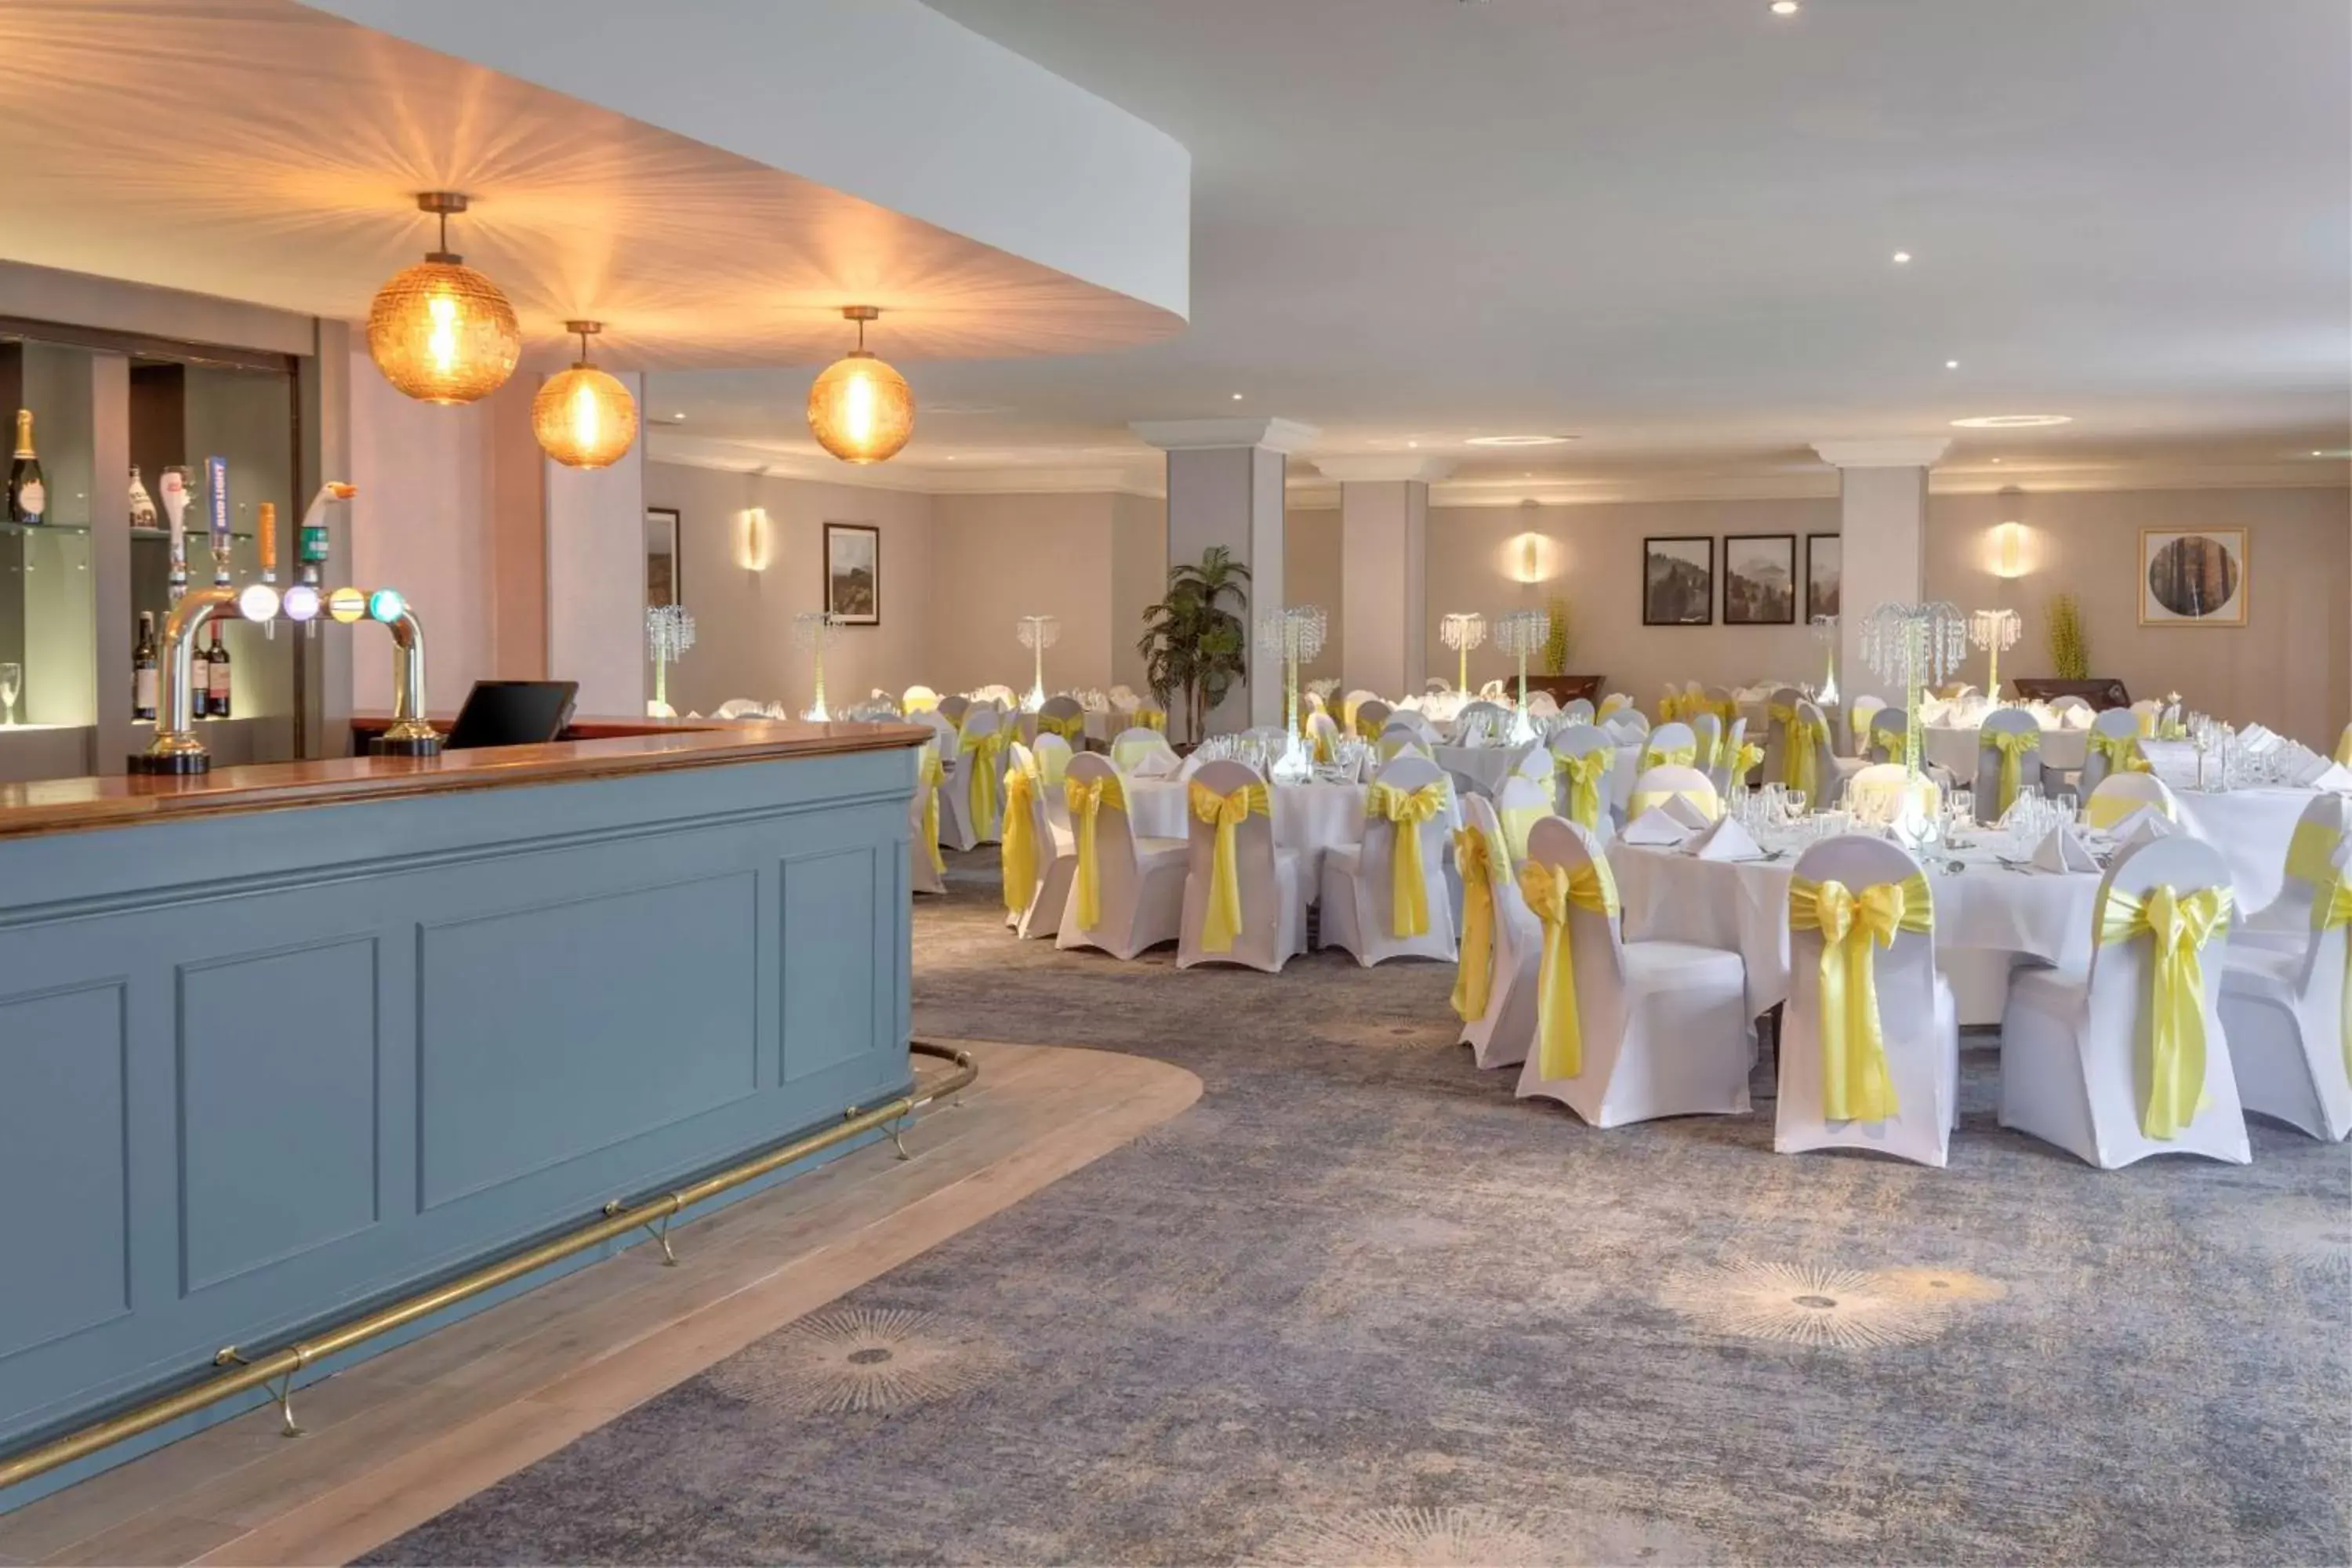 Meeting/conference room, Banquet Facilities in DoubleTree by Hilton Stoke-on-Trent, United Kingdom